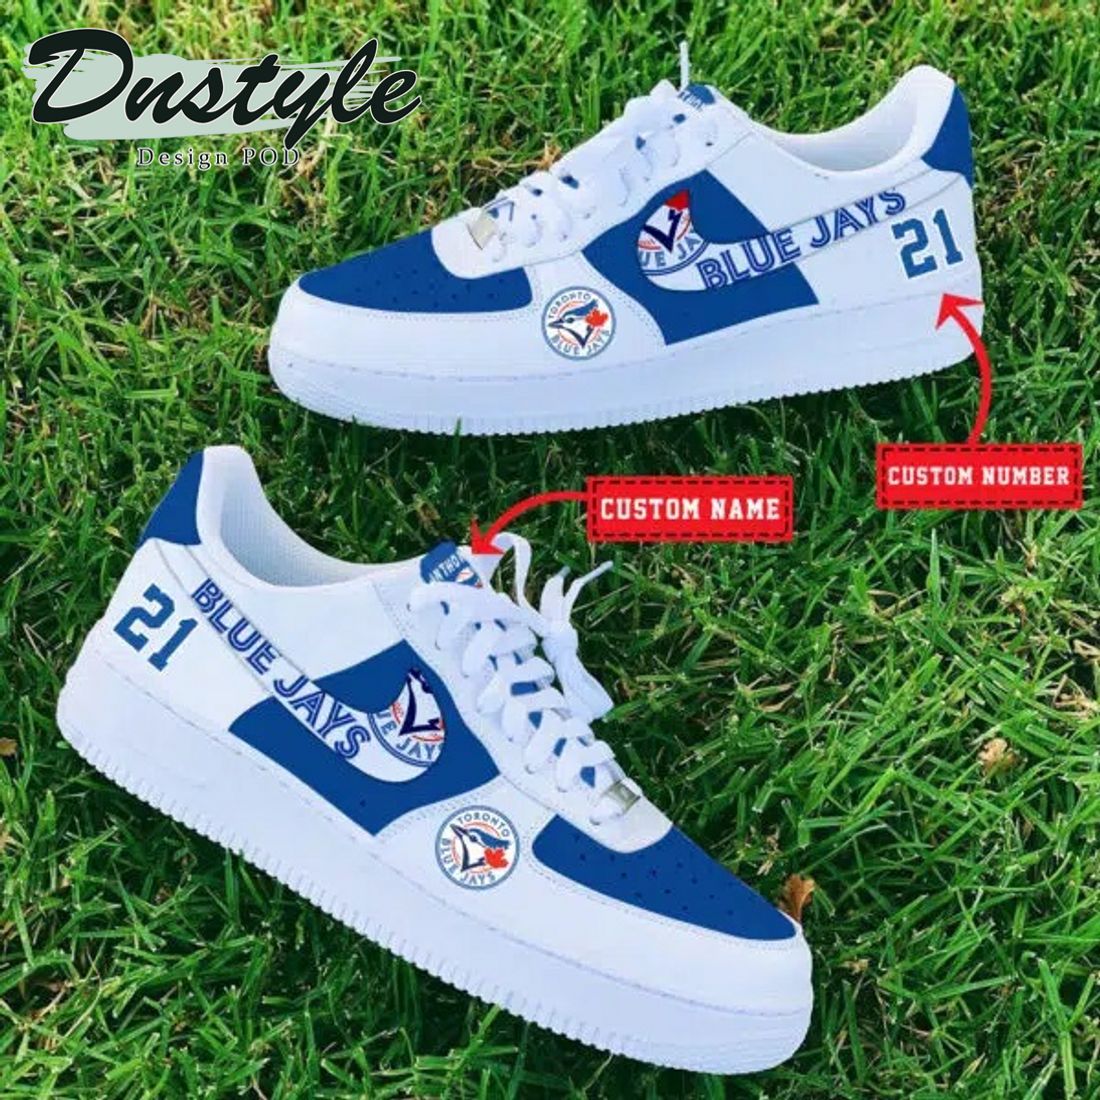 MLB Toronto Blue Jays Personalized Name Number Nike Air Force 1 Sneakers